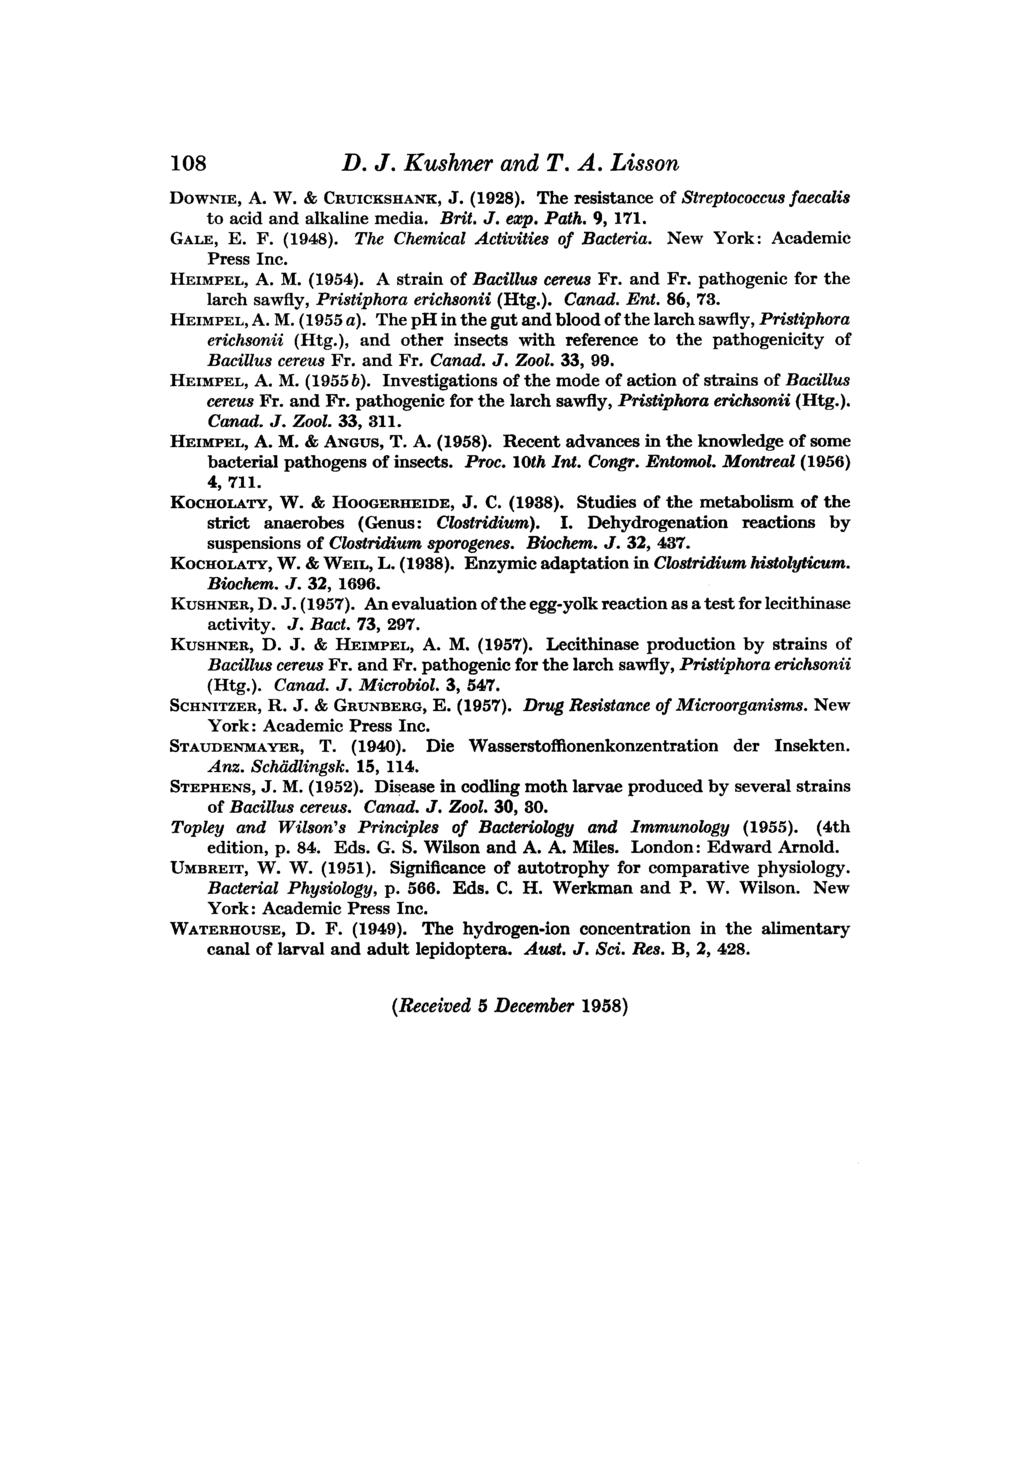 108 D. J. Kushmr and T. A. Lisson DOWNIE, A. W. & CRUICKSHANK, J. (1928). The resistance of Streptococcus faecalis to acid and alkaline media. Brit. J. ezp. Path. 9, 171. GALE, E. F. (1948).